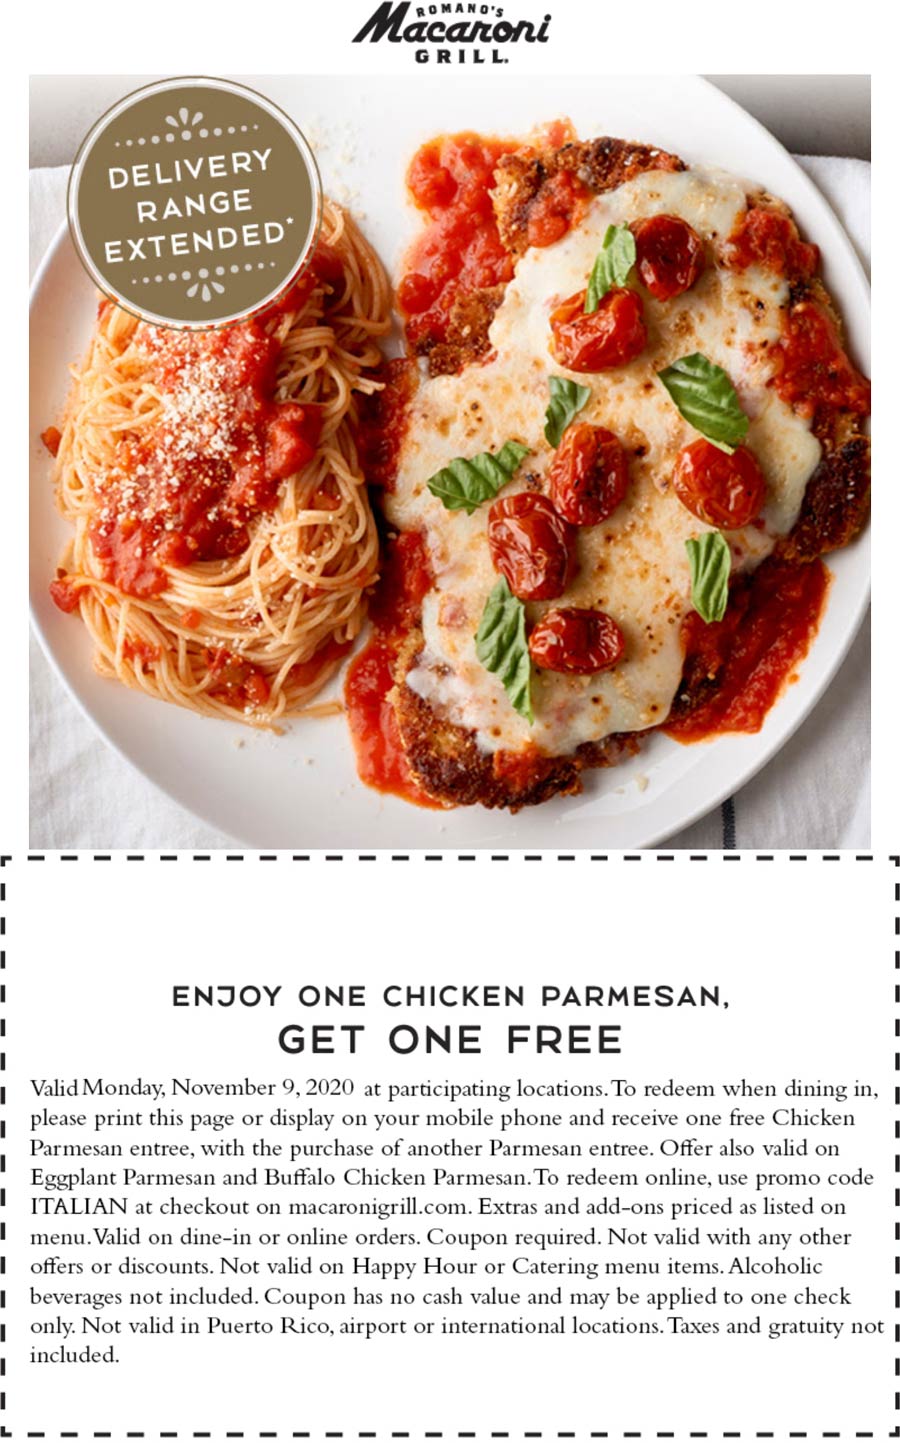 Macaroni Grill restaurants Coupon  Second chicken parmesan free today at Macaroni Grill #macaronigrill 